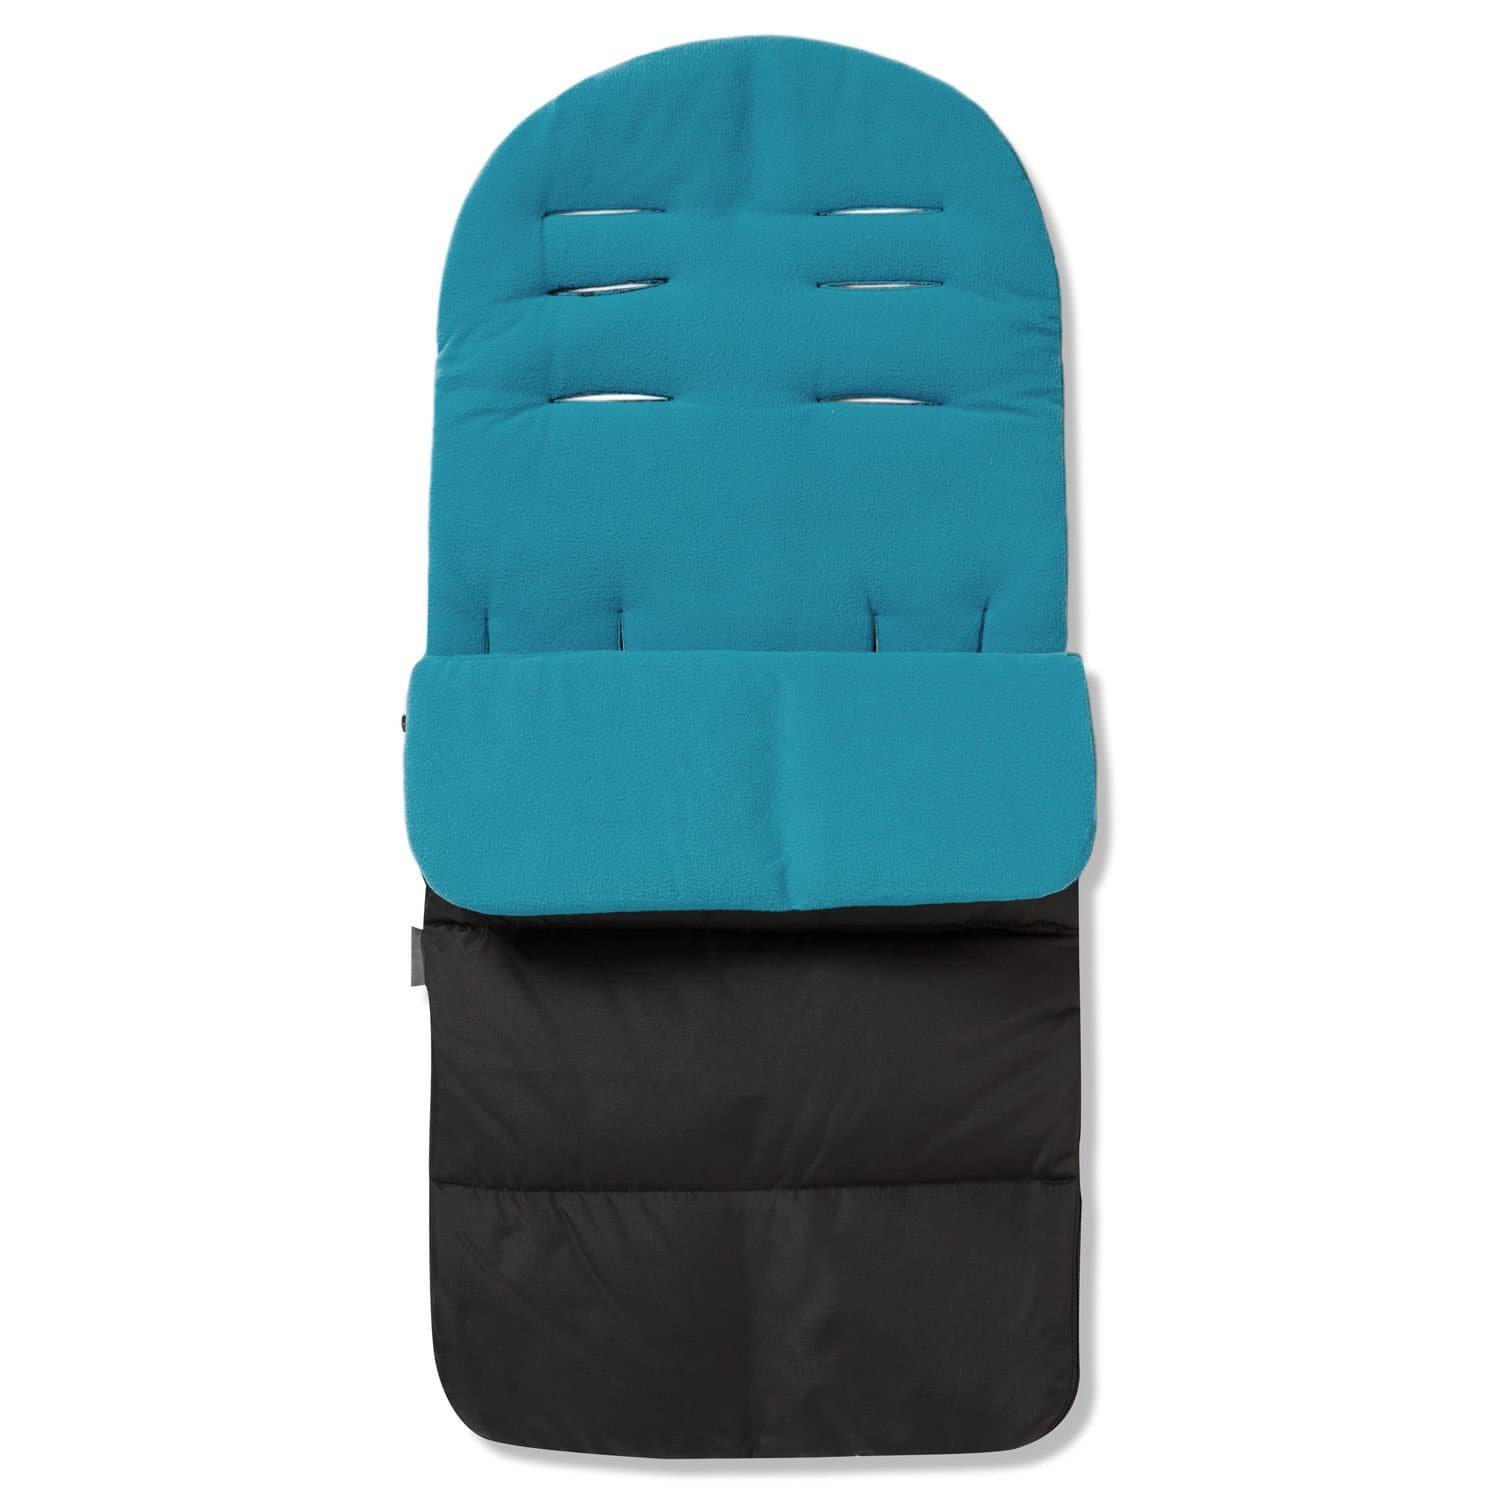 Premium Footmuff / Cosy Toes Compatible with BabyCare - Ocean Blue / Fits All Models | For Your Little One